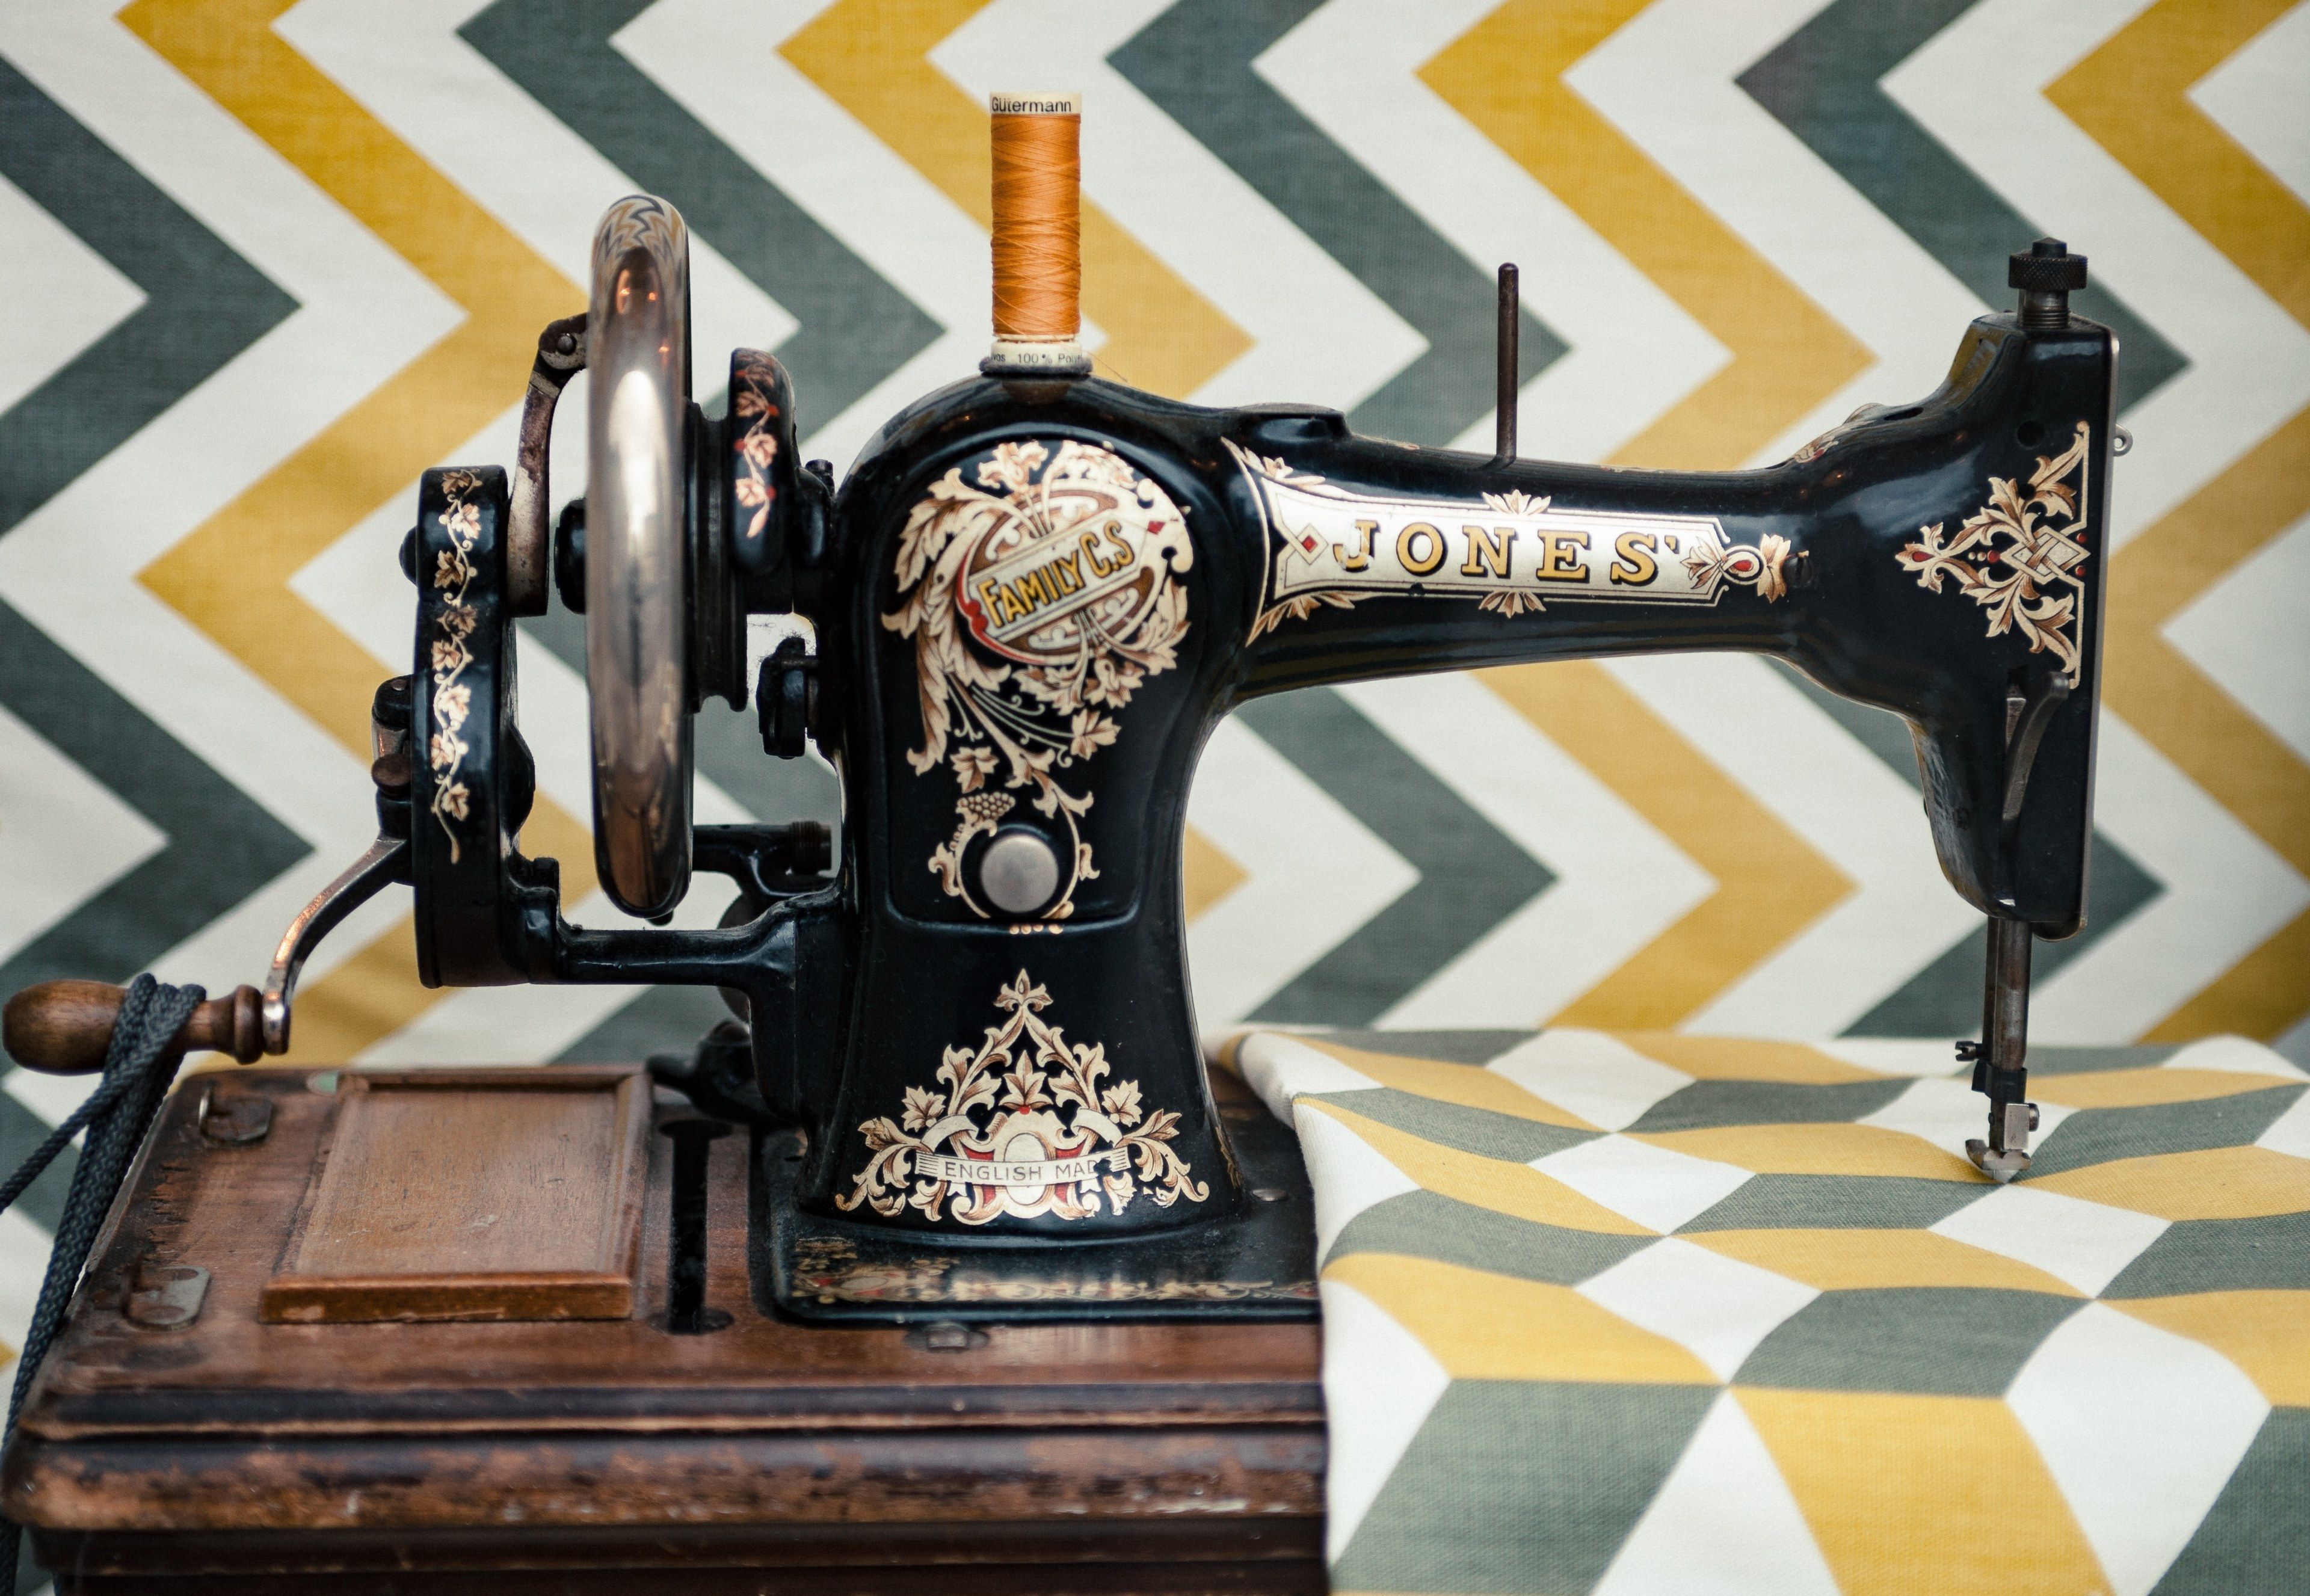 Wallpaper / the side view of an old vintage sewing machine sewing on a patterned fabric in cambridge, _vintage sewing machine 4k wallpaper